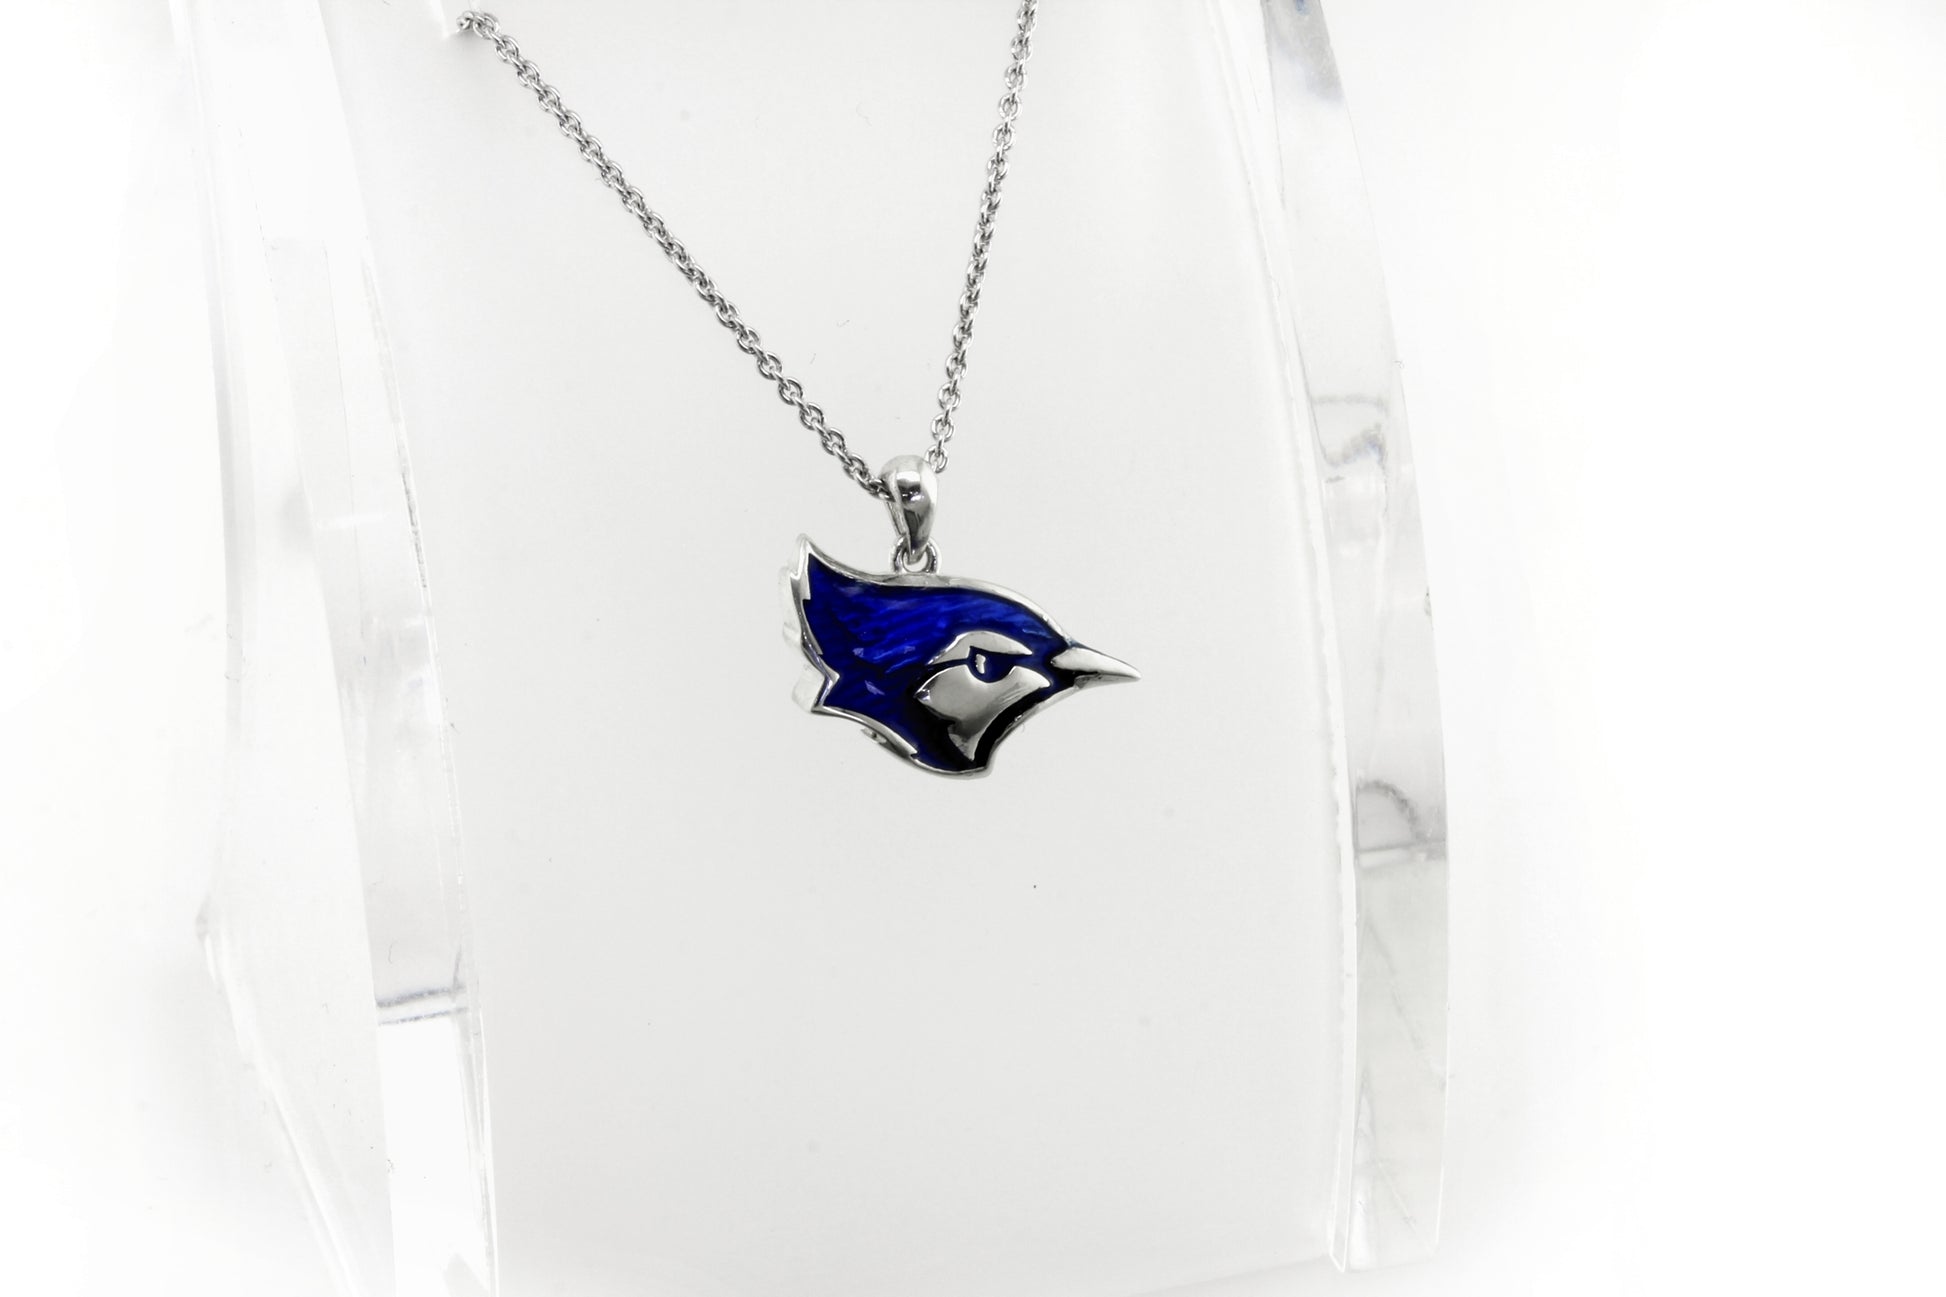 Penn Sterling Silver Necklace with Enamel Charm